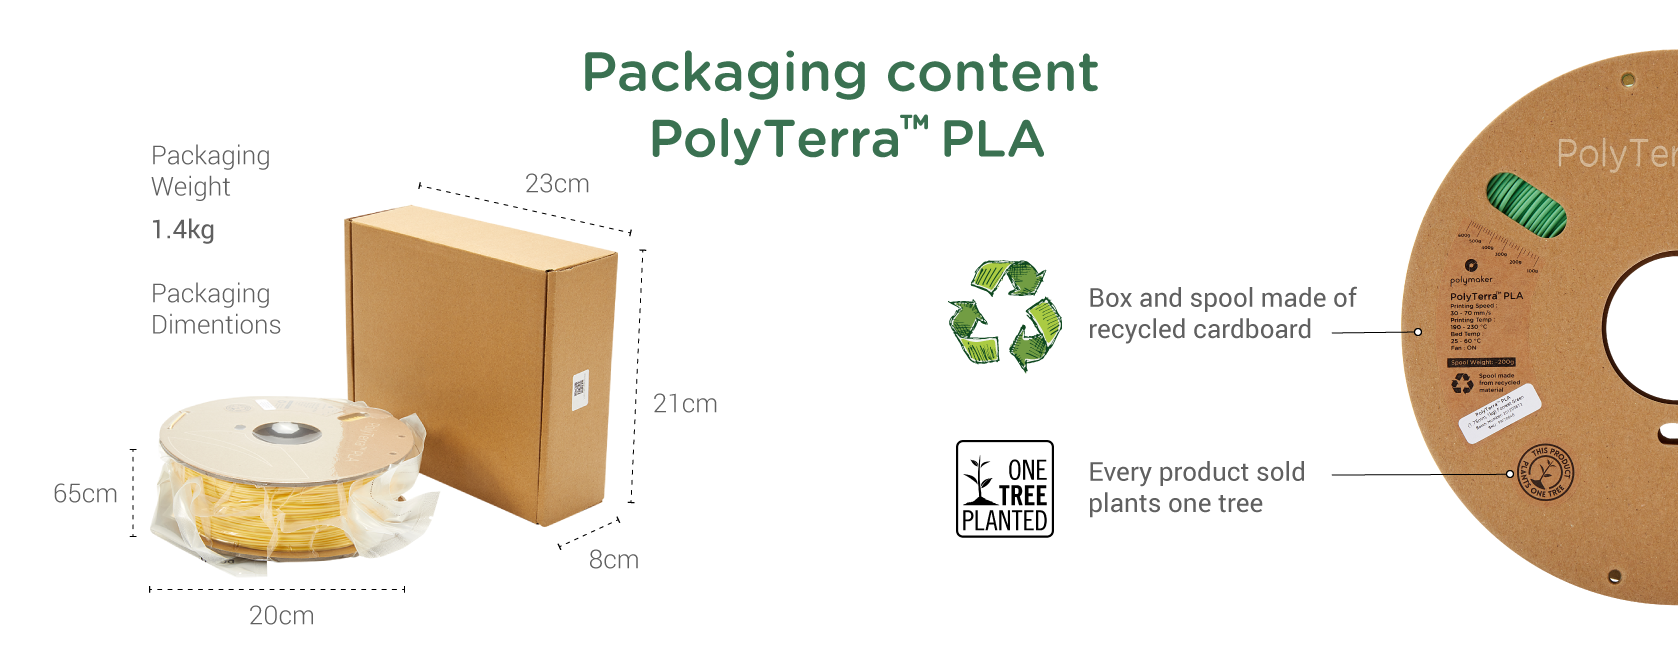 PolyTerra-Packaging-Content